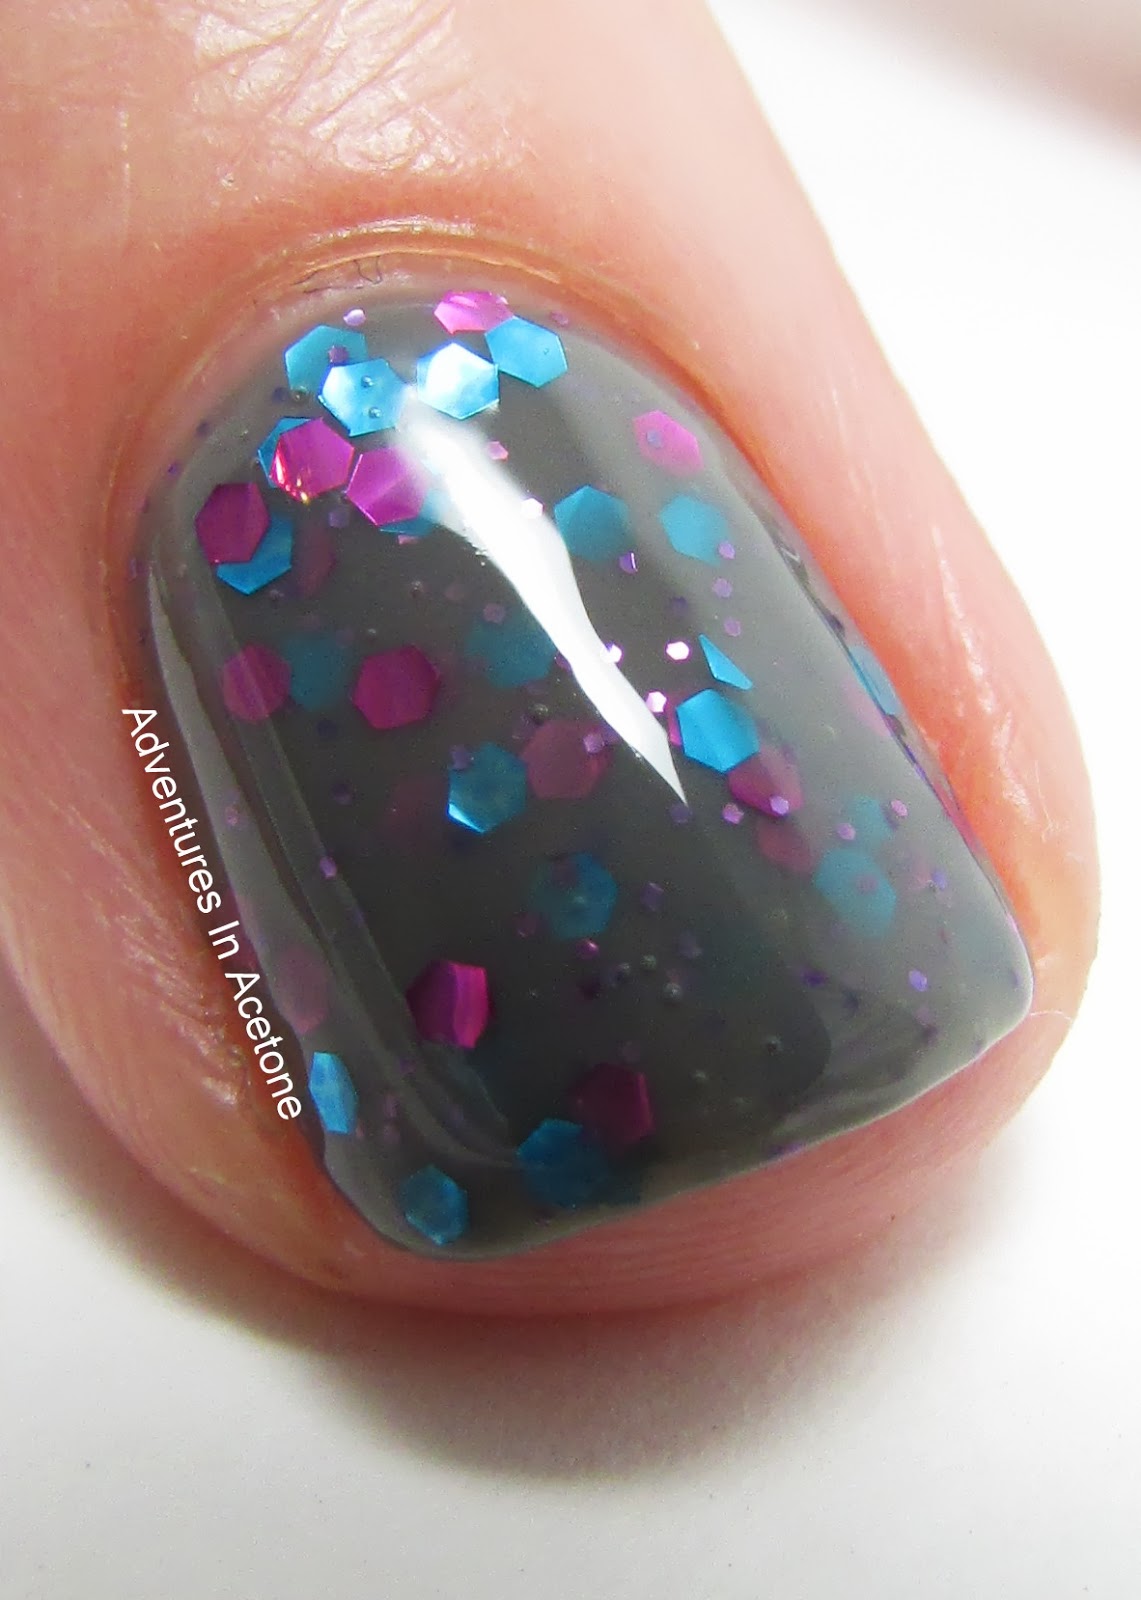 Swatch Saturday: NCLA Polishes! - Adventures In Acetone